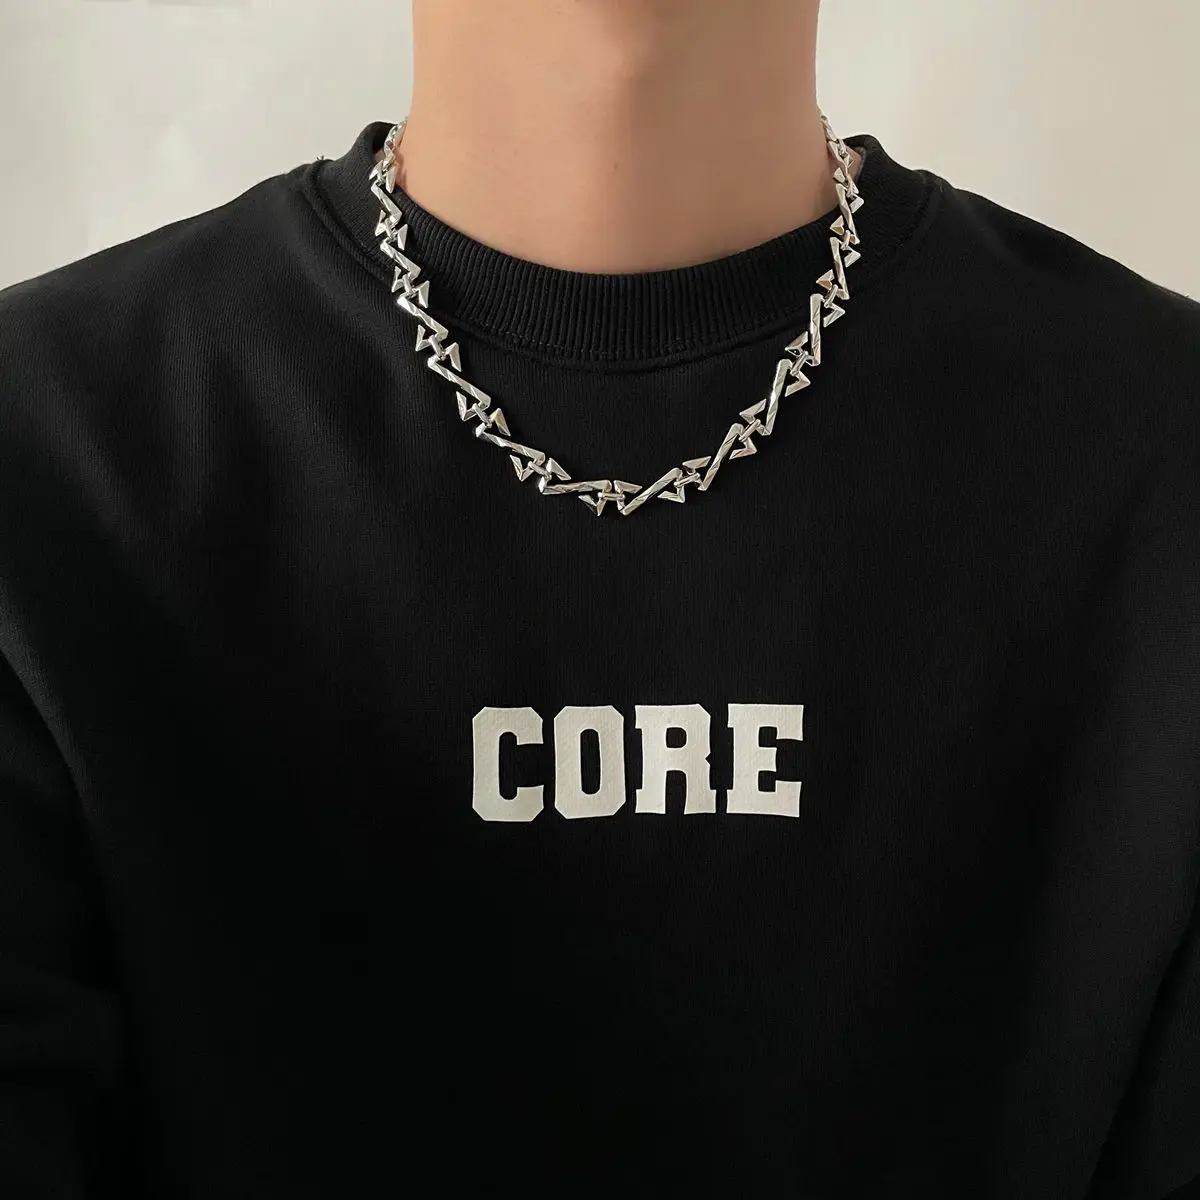 New Edgy Style Necklace For Men Trendy Personality Niche Design